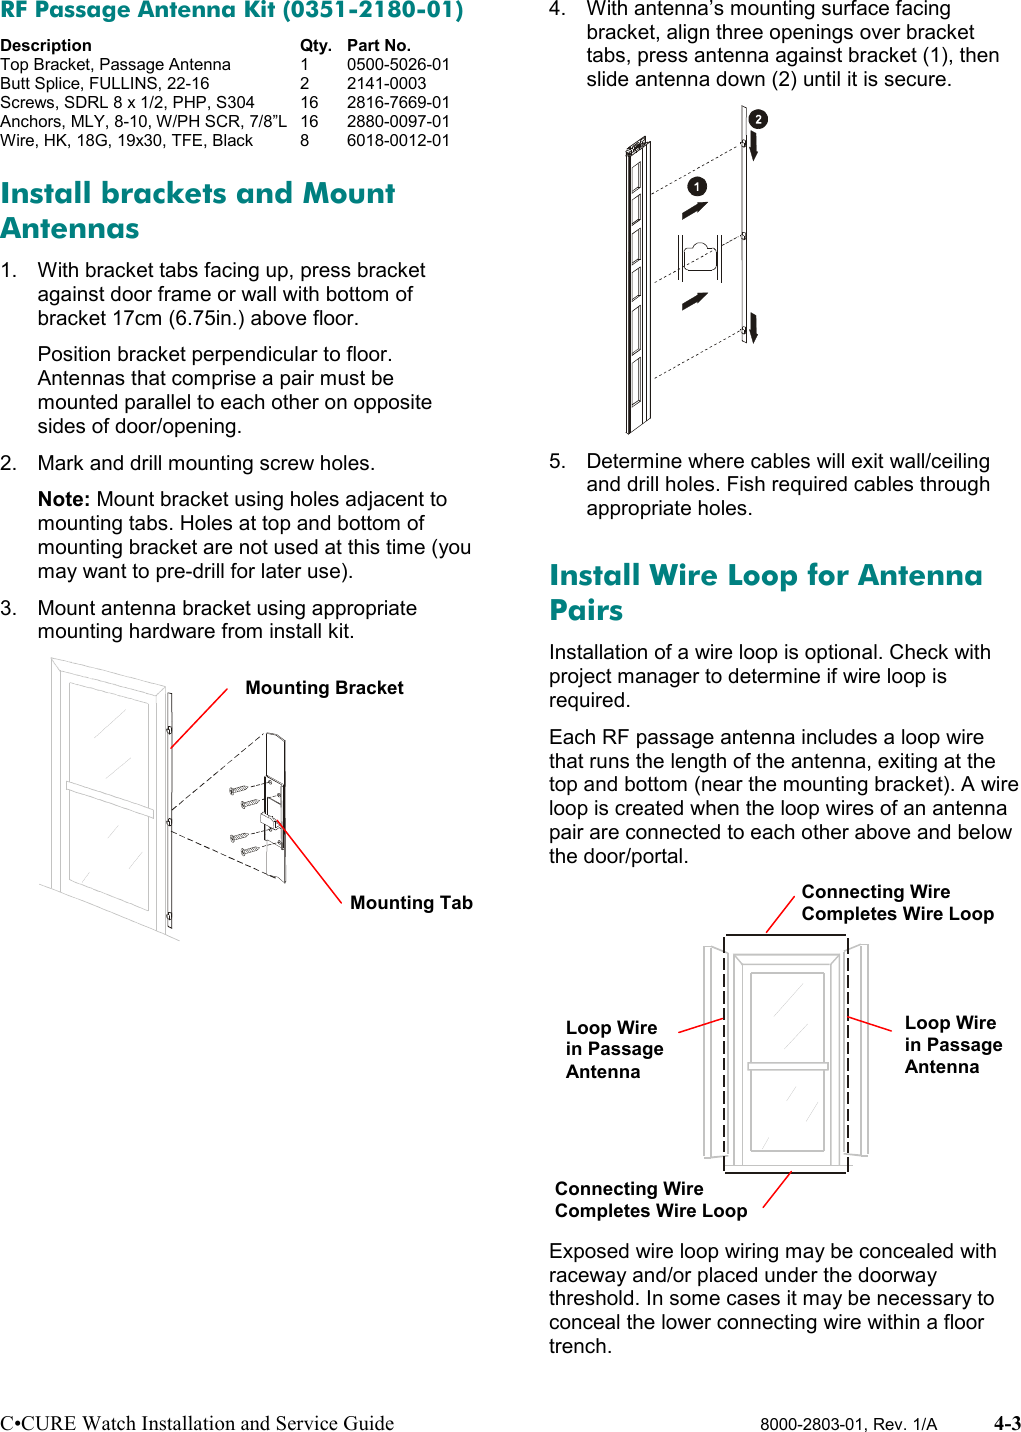 C•CURE Watch Installation and Service Guide 8000-2803-01, Rev. 1/A 4-3RF Passage Antenna Kit (0351-2180-01)Description Qty. Part No.Top Bracket, Passage Antenna 1 0500-5026-01Butt Splice, FULLINS, 22-16 2 2141-0003Screws, SDRL 8 x 1/2, PHP, S304 16 2816-7669-01Anchors, MLY, 8-10, W/PH SCR, 7/8”L 16 2880-0097-01Wire, HK, 18G, 19x30, TFE, Black 8 6018-0012-01Install brackets and MountAntennas1.  With bracket tabs facing up, press bracketagainst door frame or wall with bottom ofbracket 17cm (6.75in.) above floor.Position bracket perpendicular to floor.Antennas that comprise a pair must bemounted parallel to each other on oppositesides of door/opening.2.  Mark and drill mounting screw holes.Note: Mount bracket using holes adjacent tomounting tabs. Holes at top and bottom ofmounting bracket are not used at this time (youmay want to pre-drill for later use).3.  Mount antenna bracket using appropriatemounting hardware from install kit.4.  With antenna’s mounting surface facingbracket, align three openings over brackettabs, press antenna against bracket (1), thenslide antenna down (2) until it is secure.5.  Determine where cables will exit wall/ceilingand drill holes. Fish required cables throughappropriate holes.Install Wire Loop for AntennaPairsInstallation of a wire loop is optional. Check withproject manager to determine if wire loop isrequired.Each RF passage antenna includes a loop wirethat runs the length of the antenna, exiting at thetop and bottom (near the mounting bracket). A wireloop is created when the loop wires of an antennapair are connected to each other above and belowthe door/portal.Exposed wire loop wiring may be concealed withraceway and/or placed under the doorwaythreshold. In some cases it may be necessary toconceal the lower connecting wire within a floortrench.Mounting BracketMounting TabLoop Wirein PassageAntennaLoop Wirein PassageAntennaConnecting WireCompletes Wire LoopConnecting WireCompletes Wire Loop